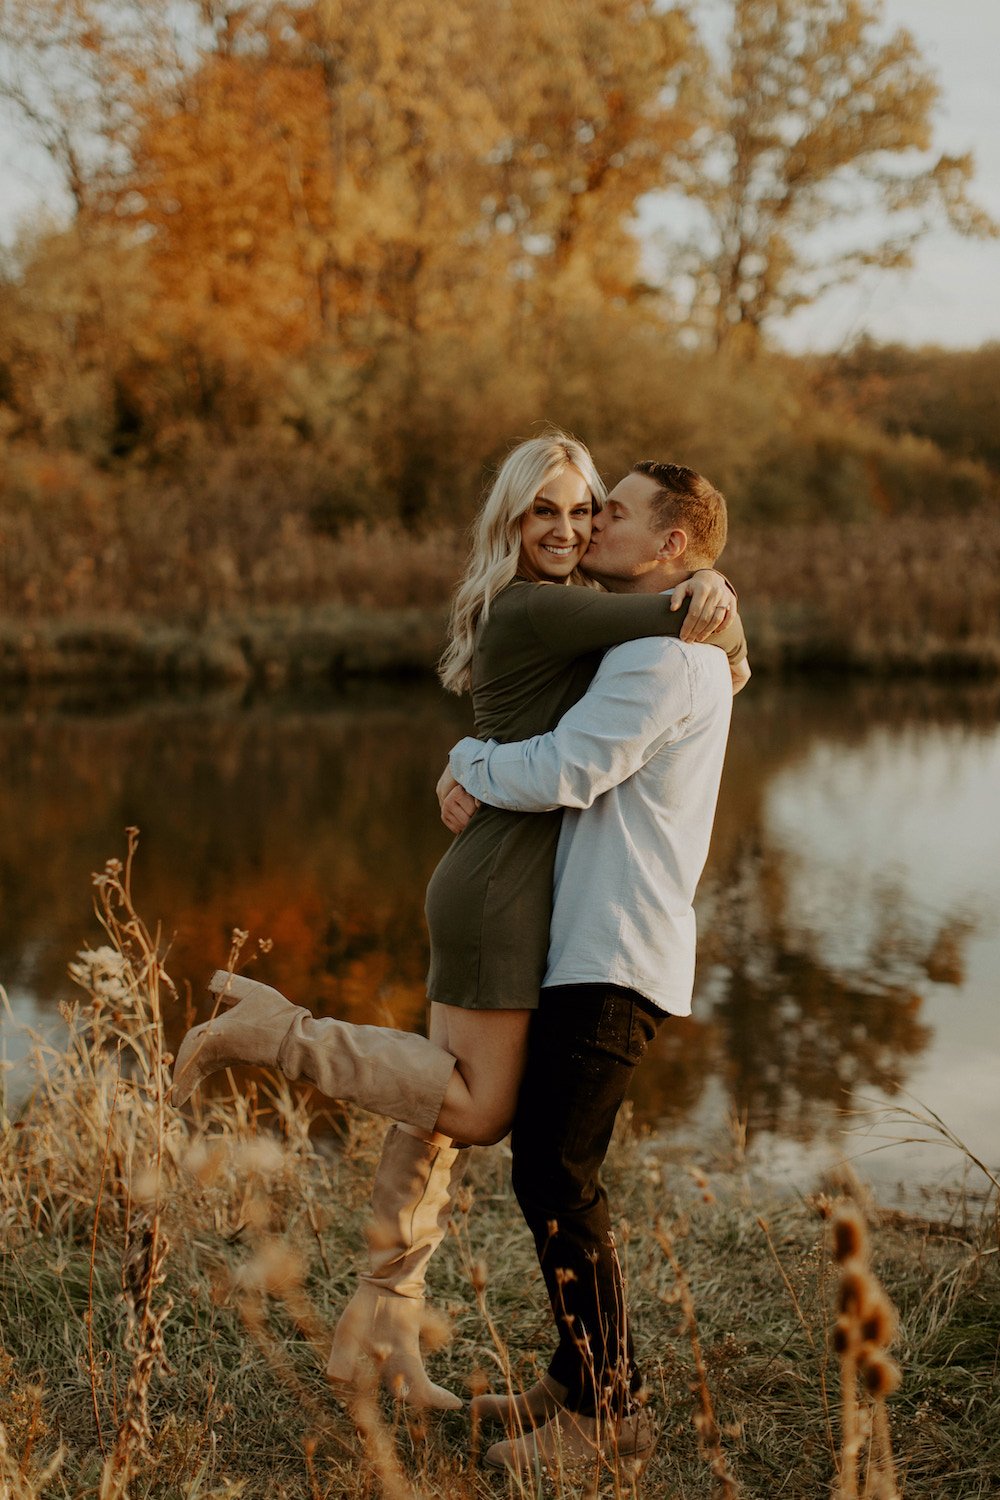 Fall engagement photo outfits.